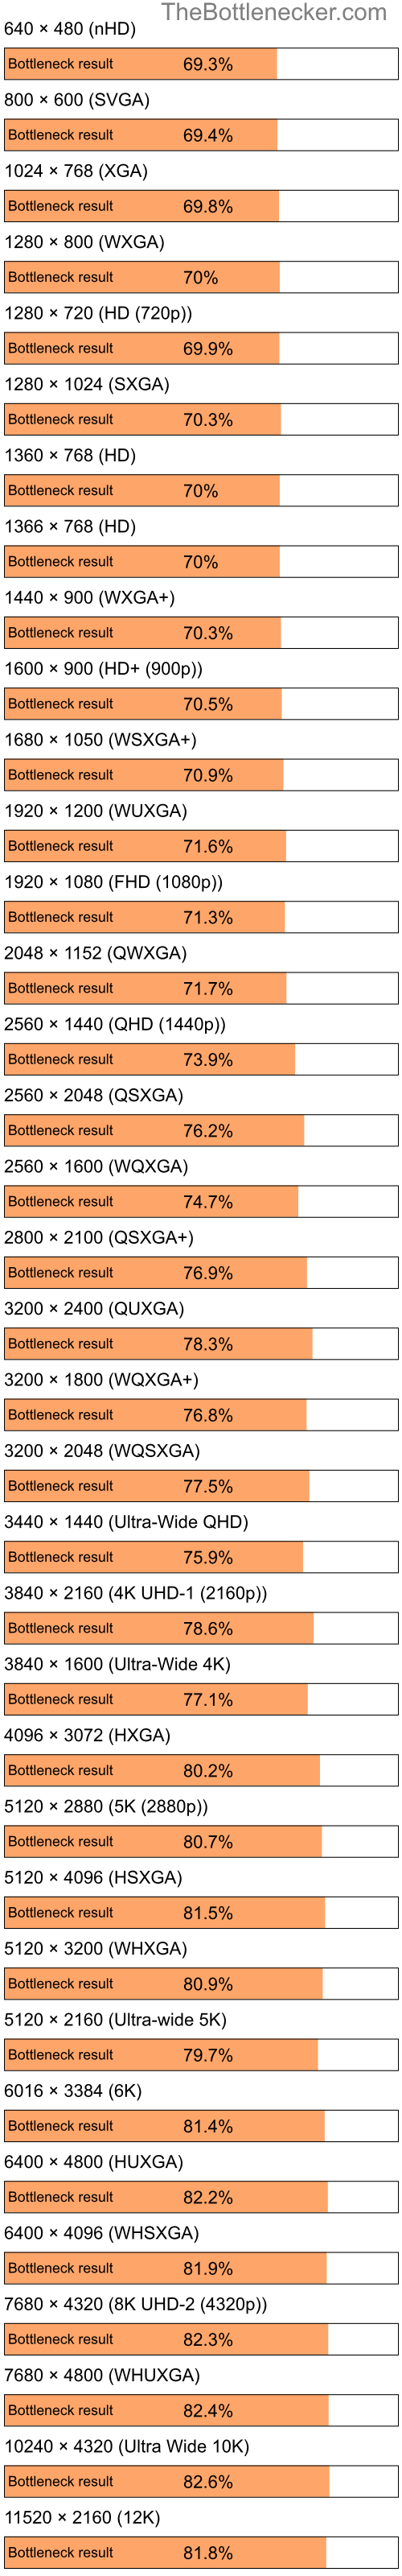 Bottleneck results by resolution for Intel Celeron M 410 and AMD Mobility Radeon 9600 in Processor Intense Tasks